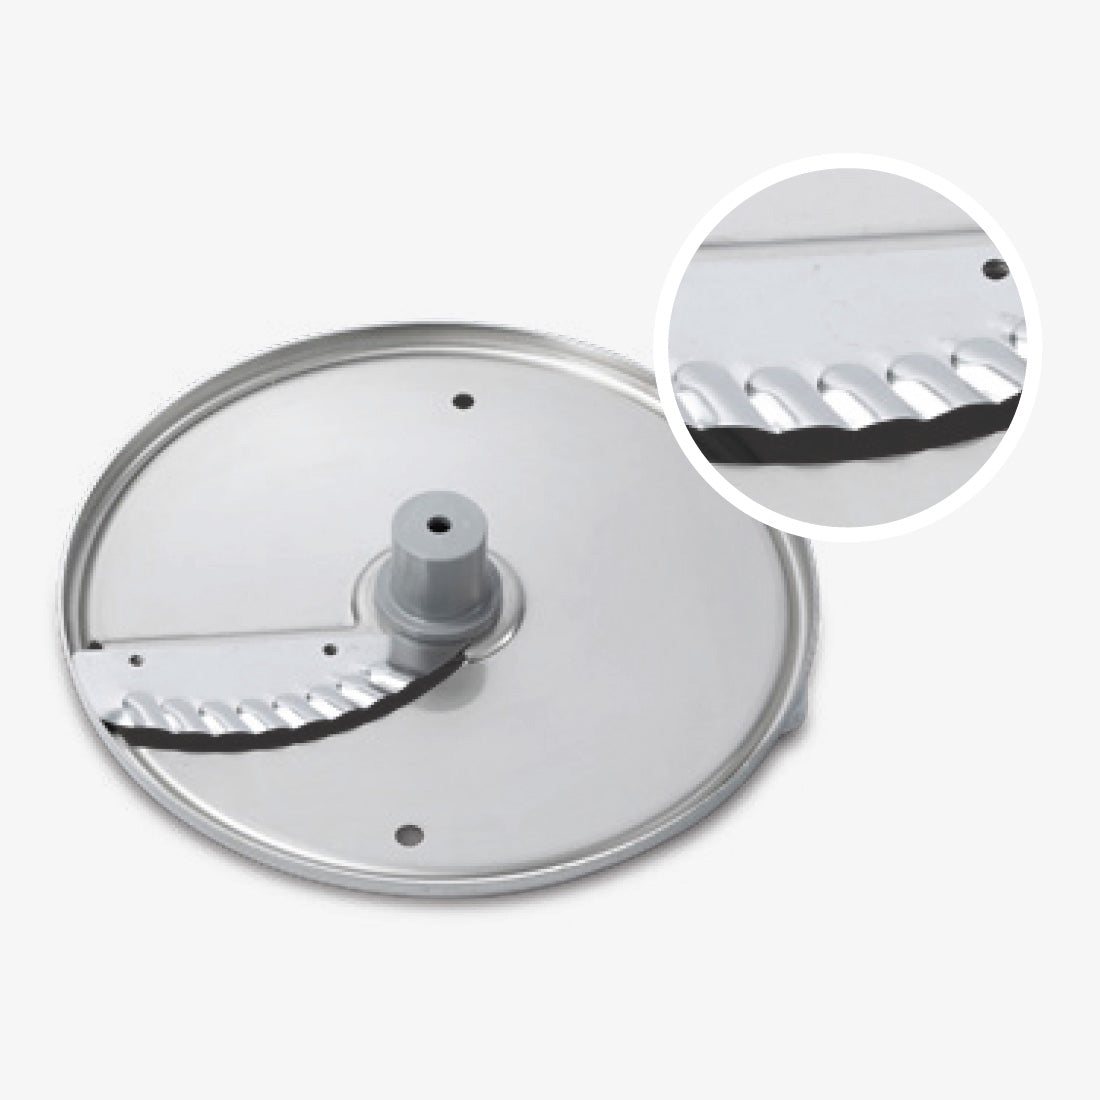 Dito Sama P4U Stainless Steel Wavy Slicing Disc 5mm DS650219